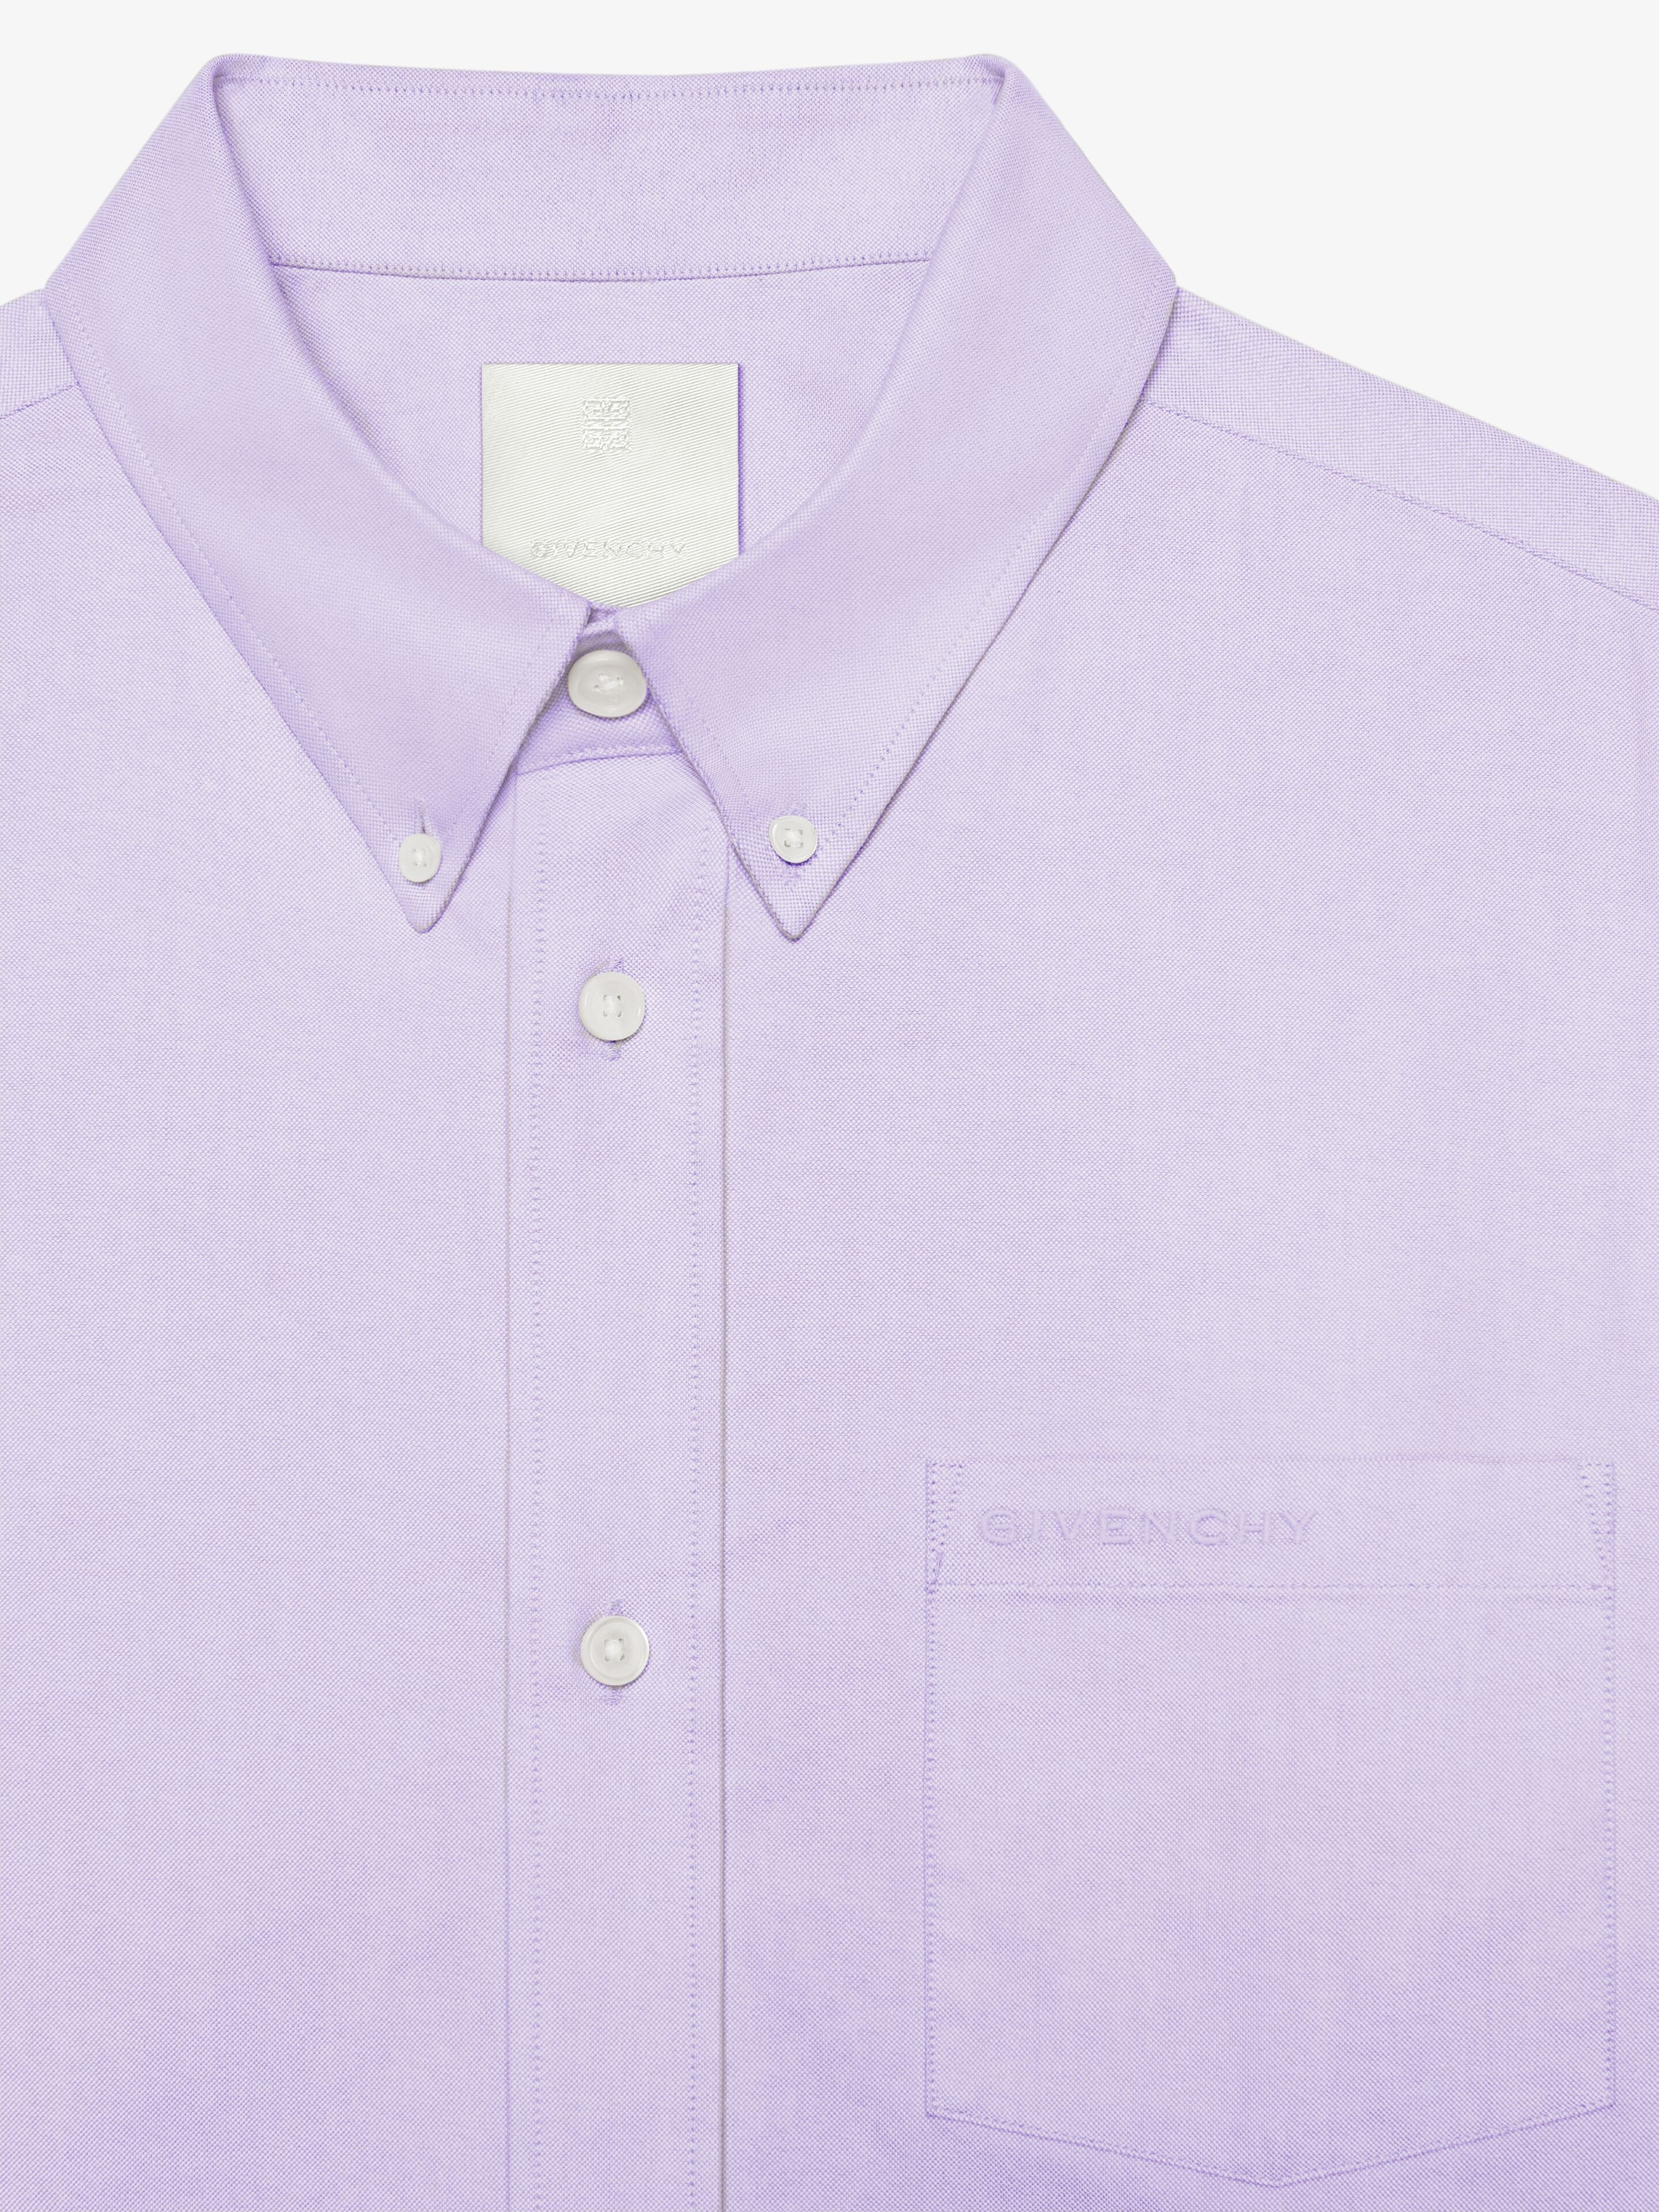 SHIRT IN COTTON WITH POCKET - 5